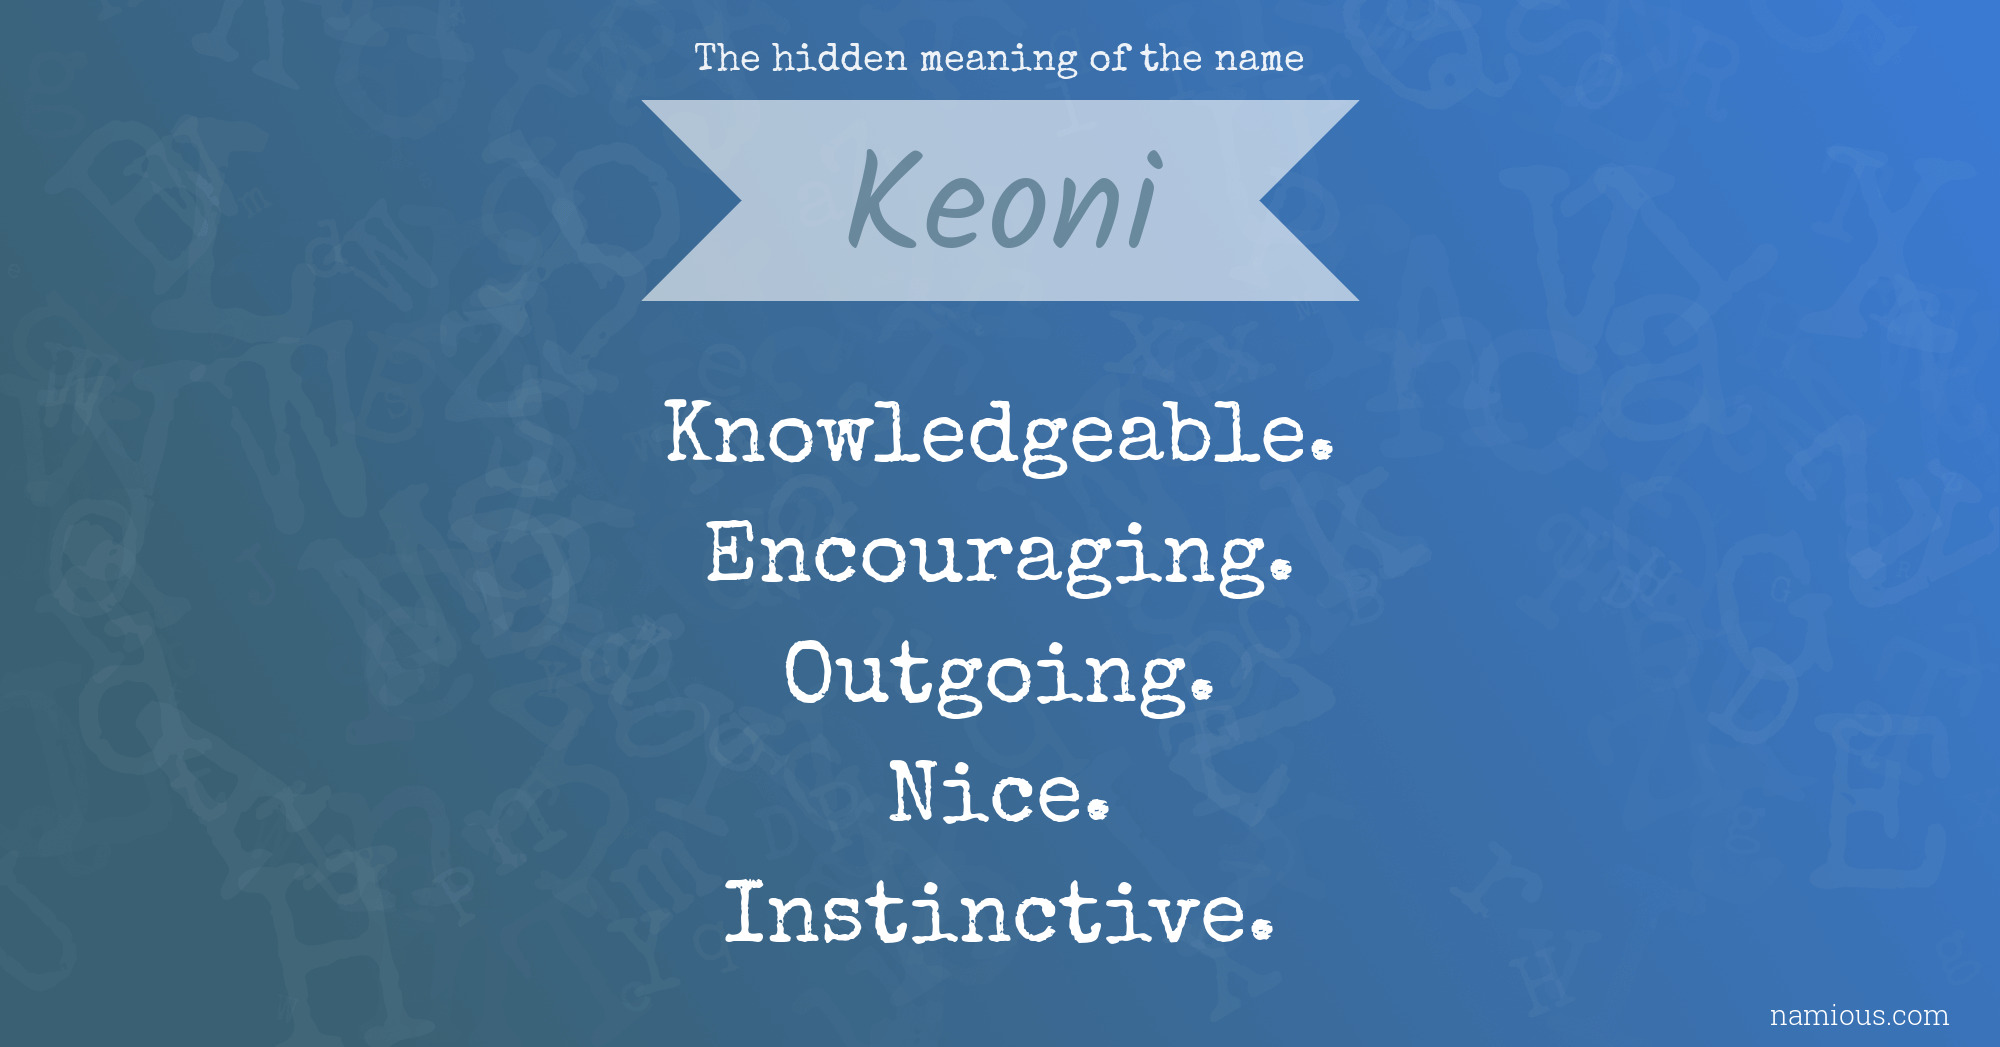 The hidden meaning of the name Keoni